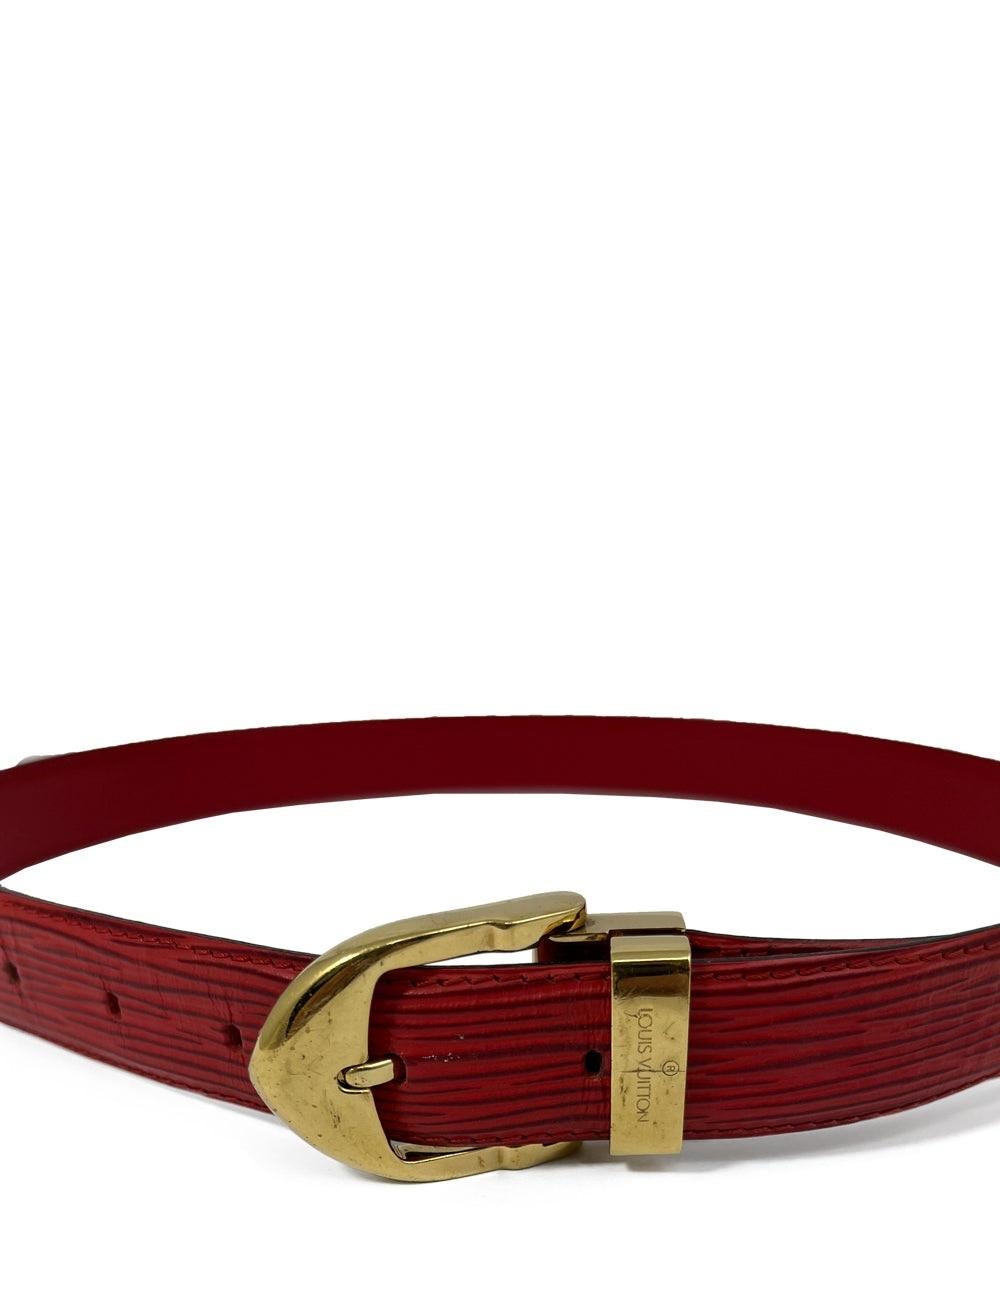 Louis Vuitton red Epi belt with gold buckle. Perfect addition to any outfit.

Additional information:
Size: EU 36
Overall condition: Buckle bears some scratches. Belt has been cut to be made smaller.
